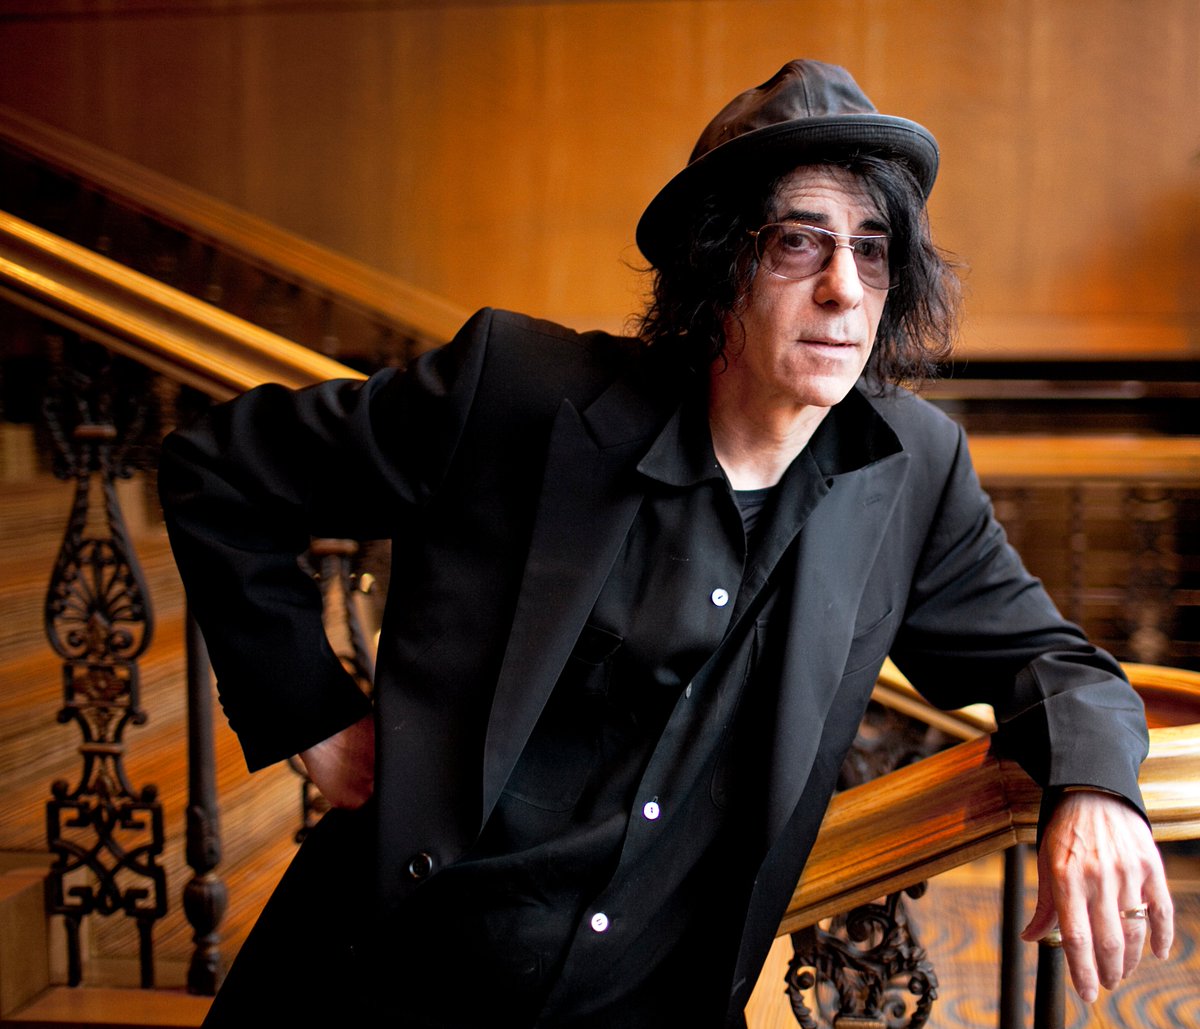 Happy Birthday to the one and only @PeterWolf_Woofa - lead singer of the J Geils band and the Woofa Goofa DJ who helped start Boston radio station WBCN  Engine Room members Tim Archibald & Brian Maes were honored to be part of the House Party 5.  Wishing Peter all the very best